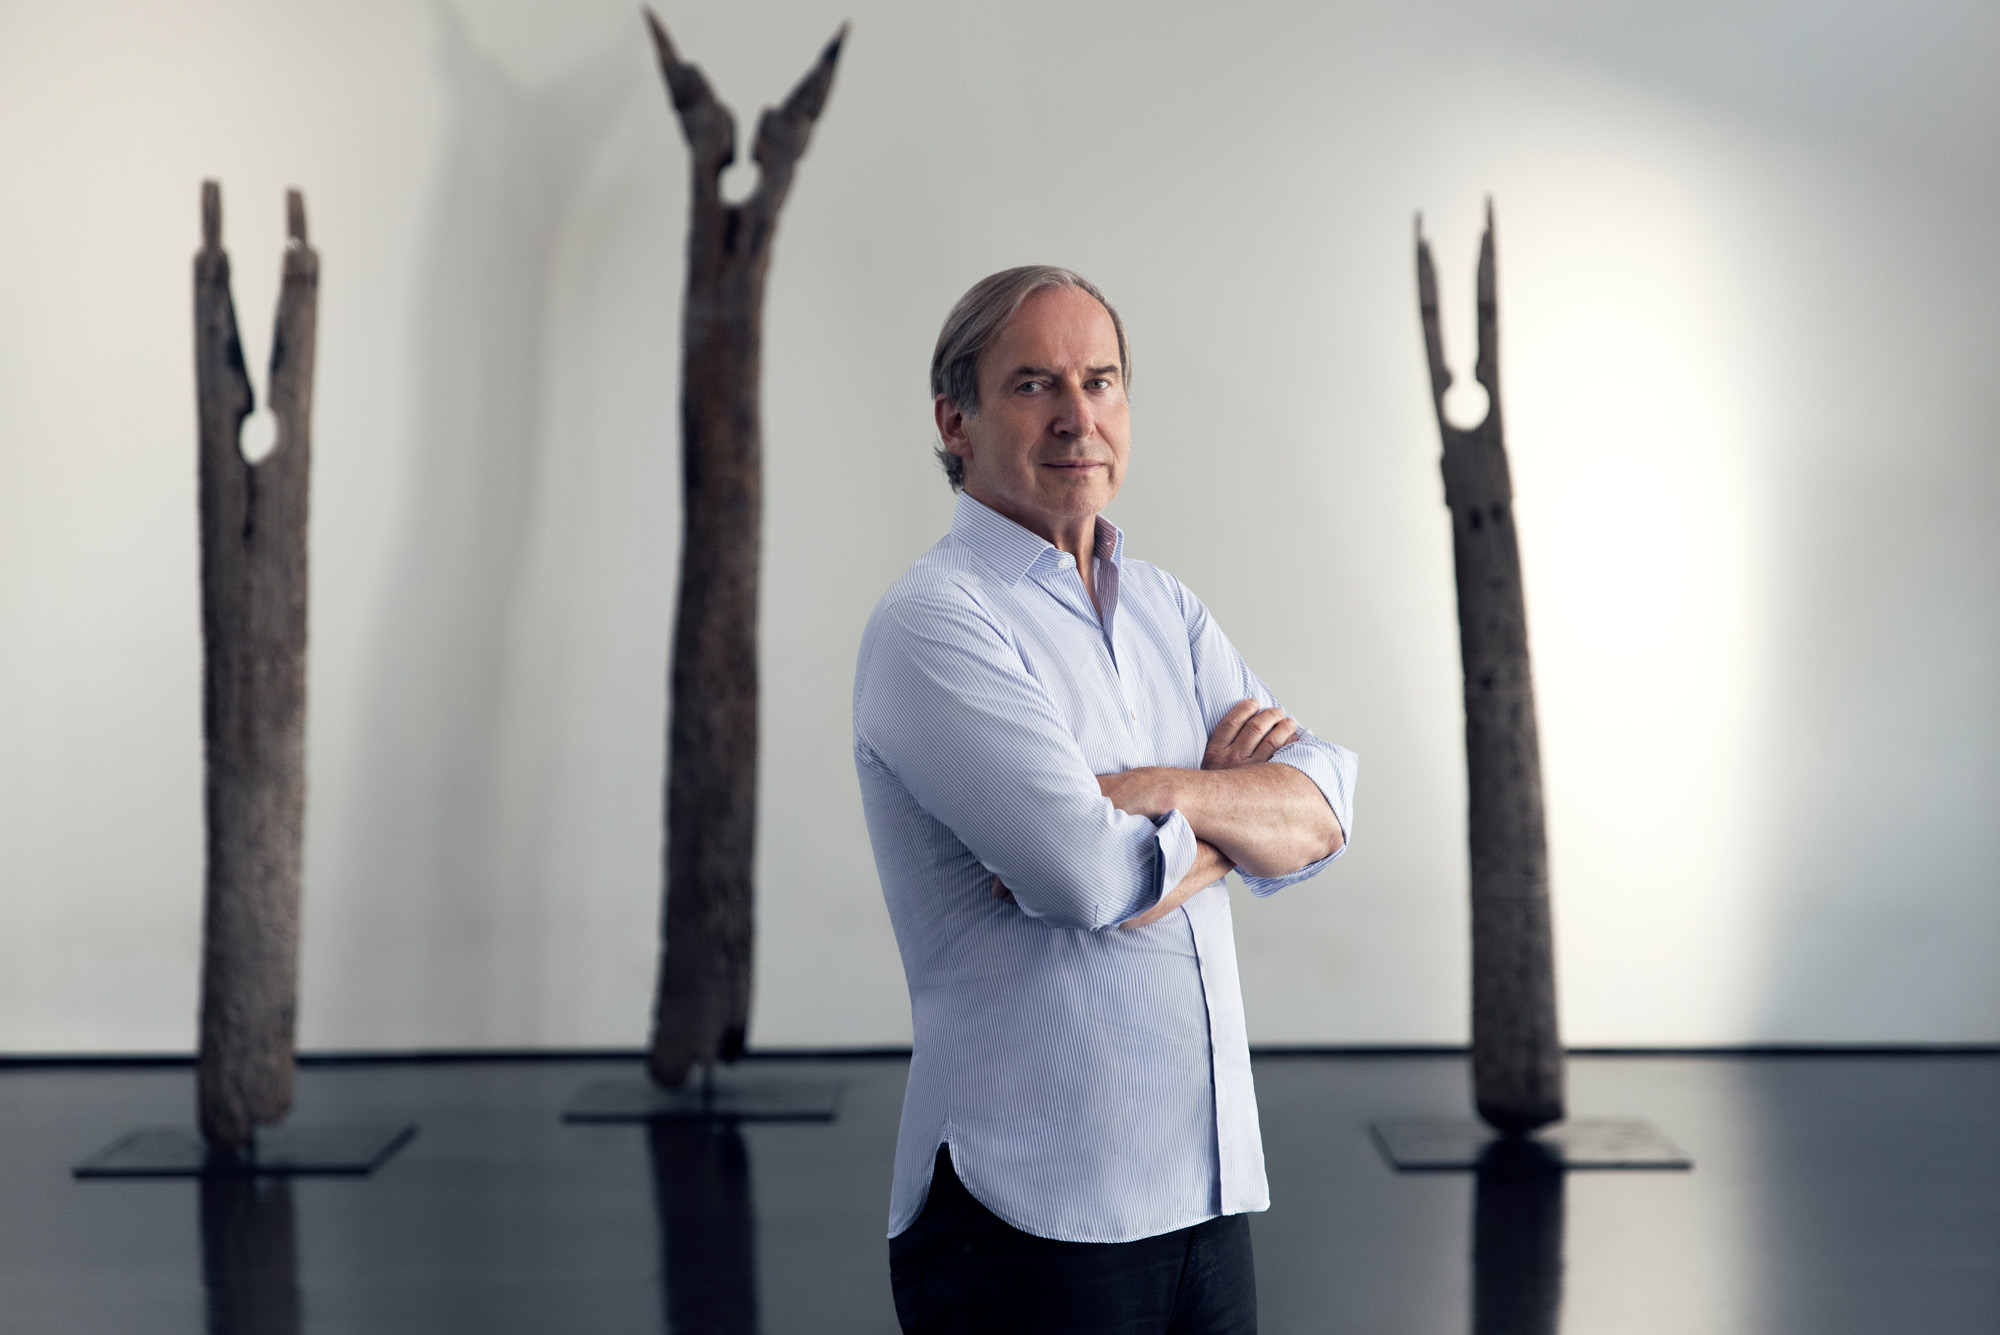 Simon De Pury Standing in Front of Art Pieces for the Waldorf Astoria Tower